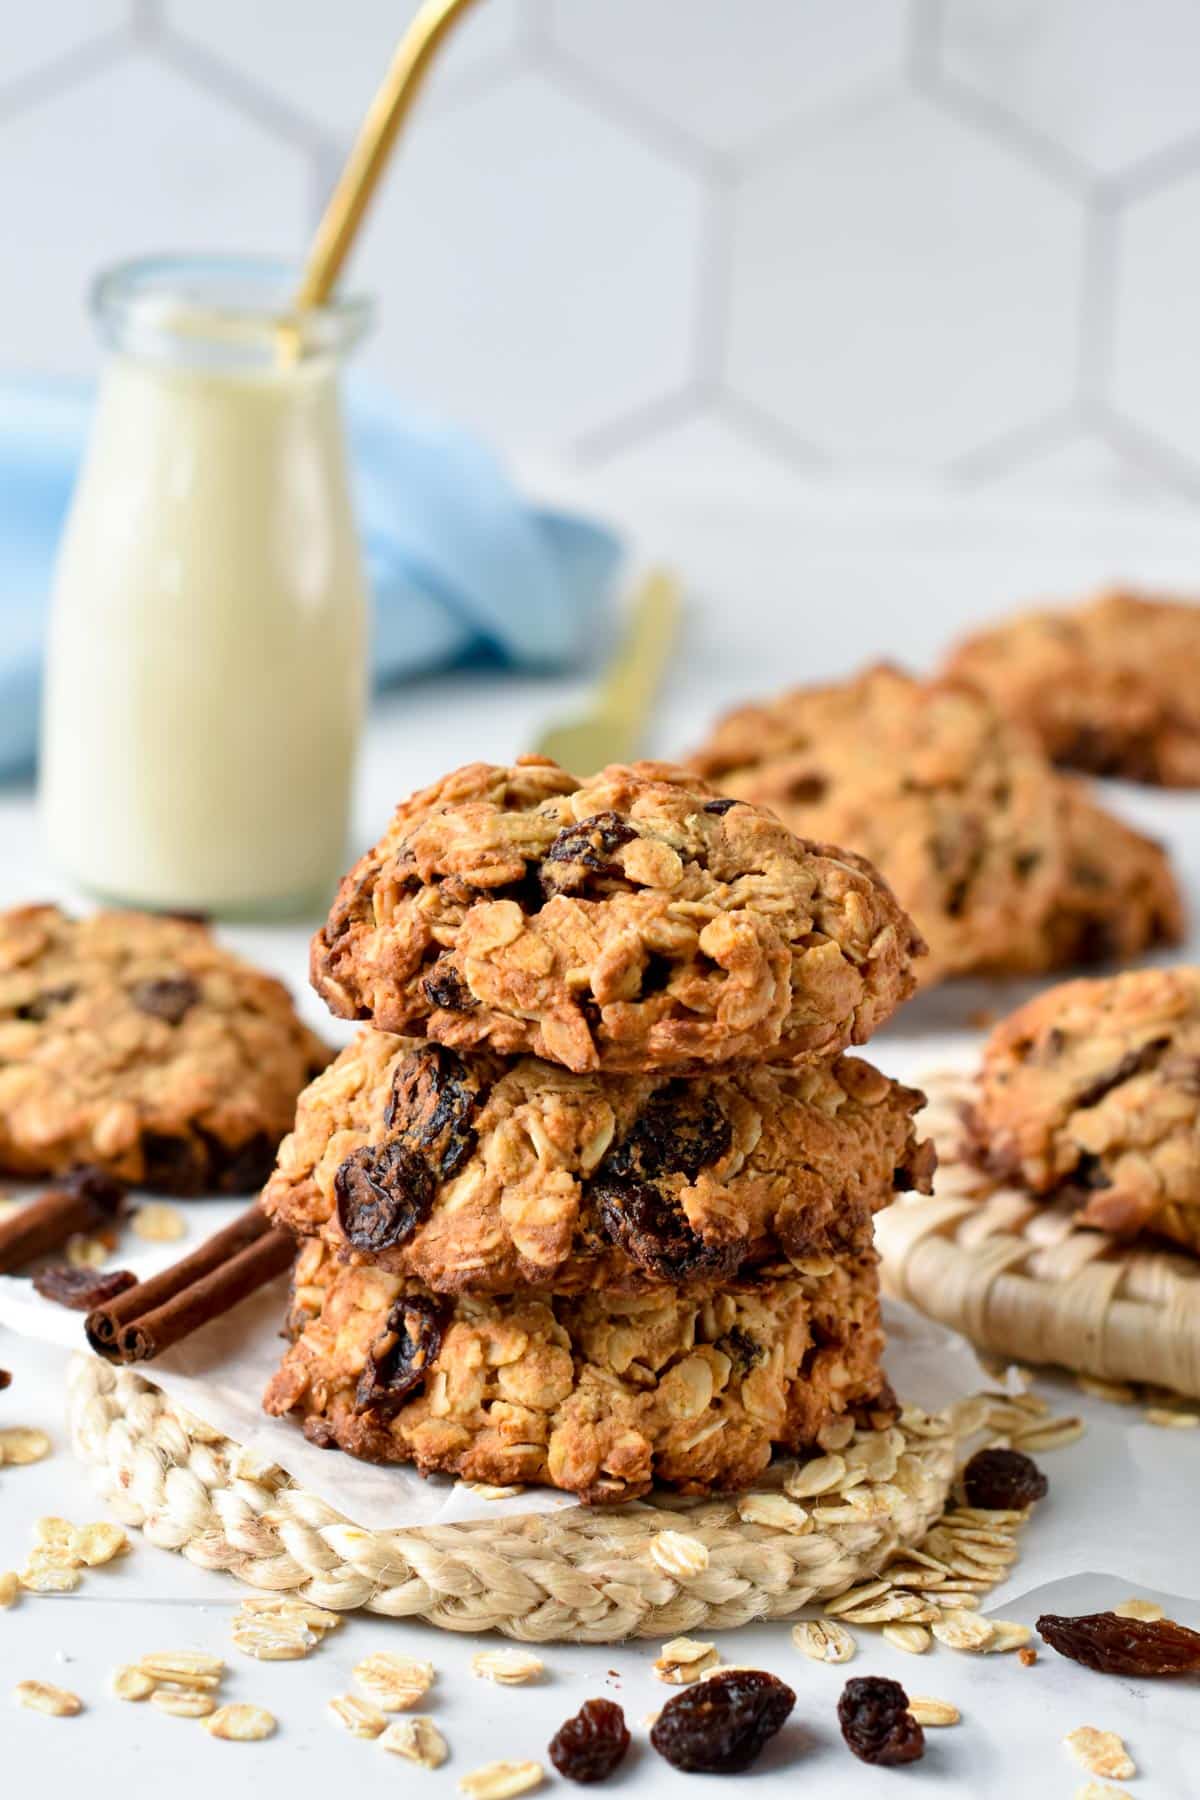 These Oatmeal Raisin Protein Cookies are the easiest high-protein breakfast or post-workout cookies to fuel you up with 14 grams of plant-based proteins per cookie.